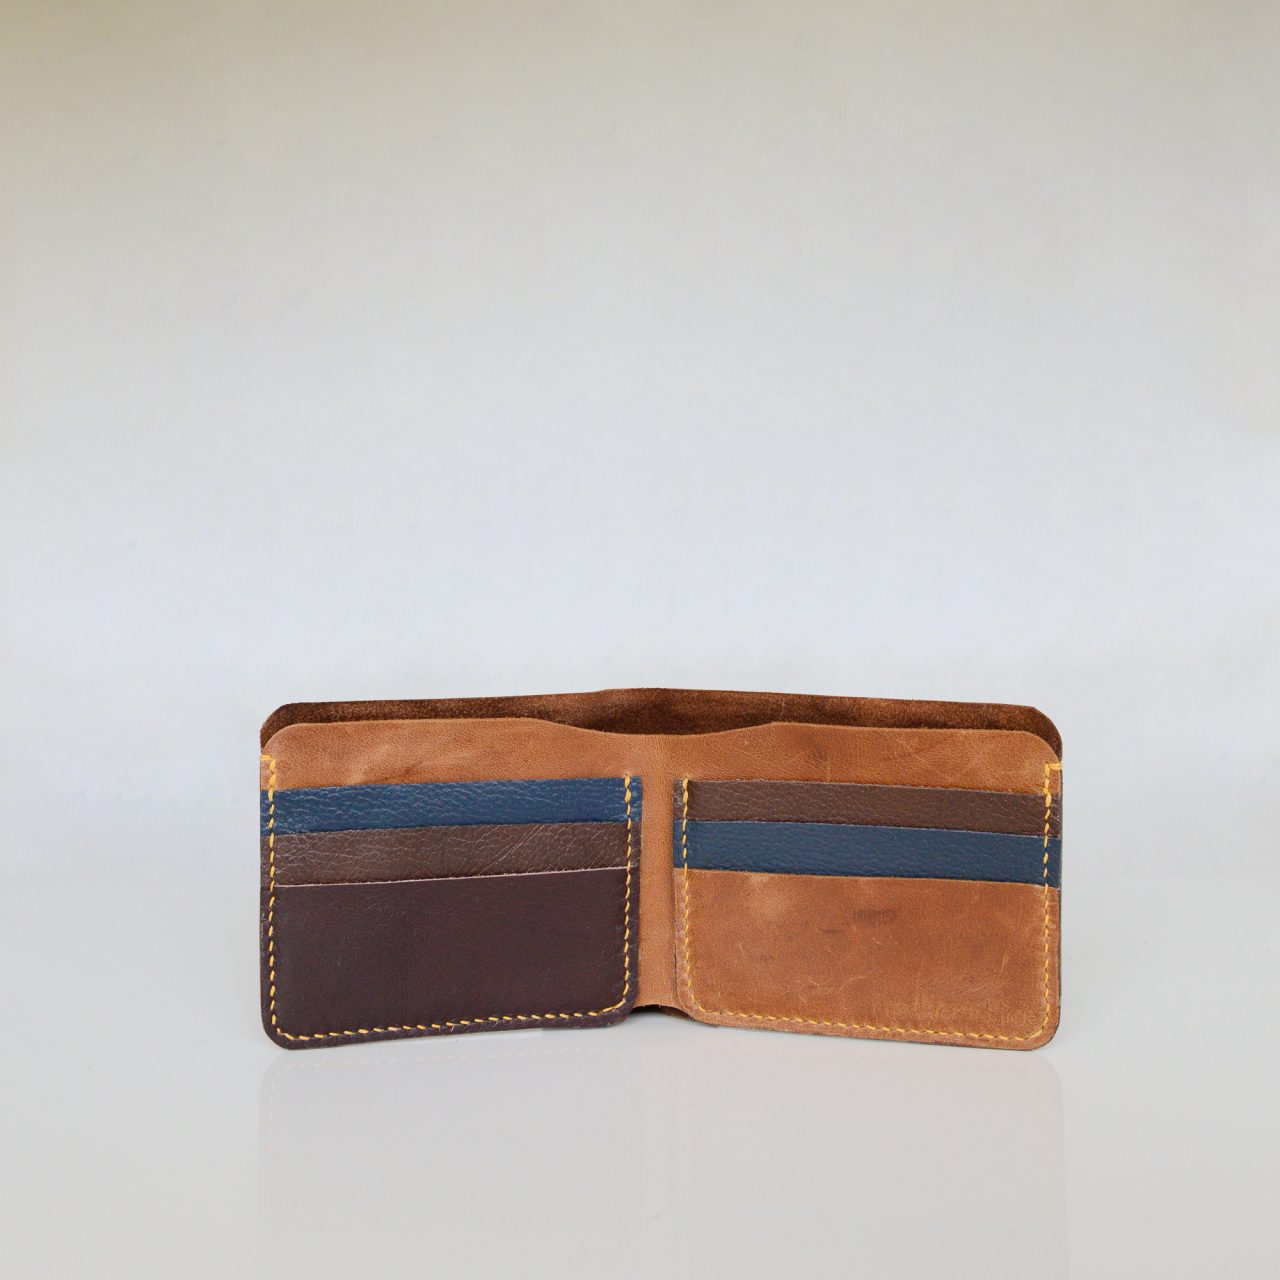 Blue and brown wallet made from upcycled leather